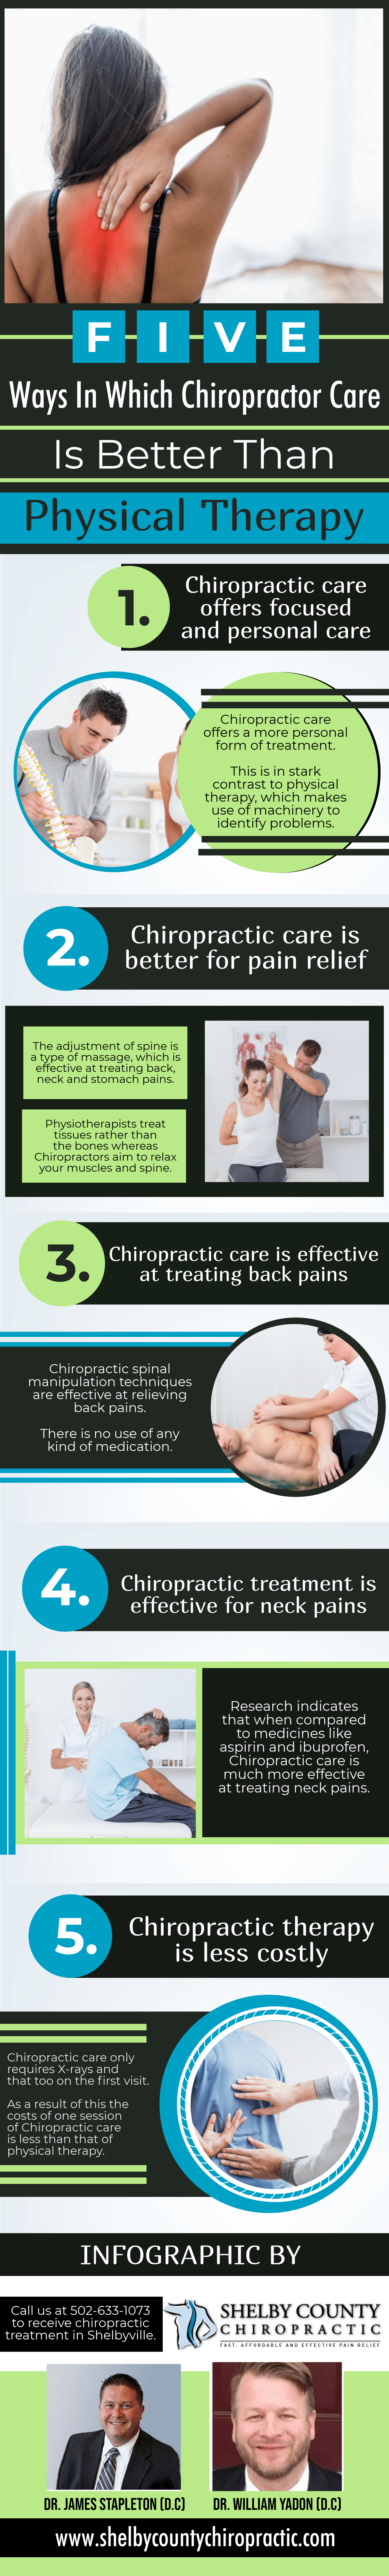 5 Ways In Which Chiropractic Care is Better Than Physical Therapy-min